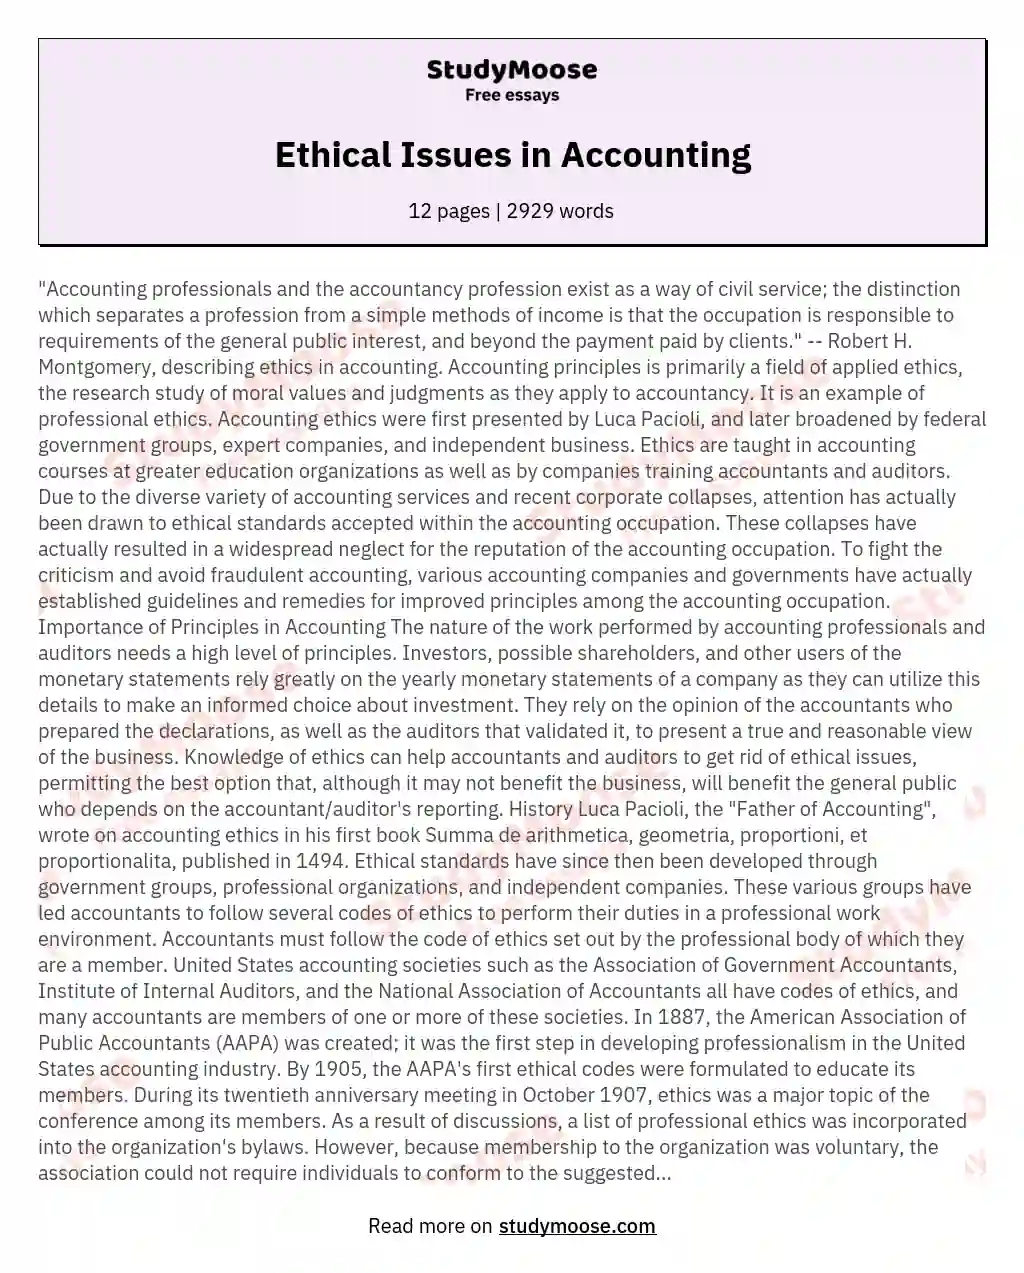 ethical issues in accounting case study